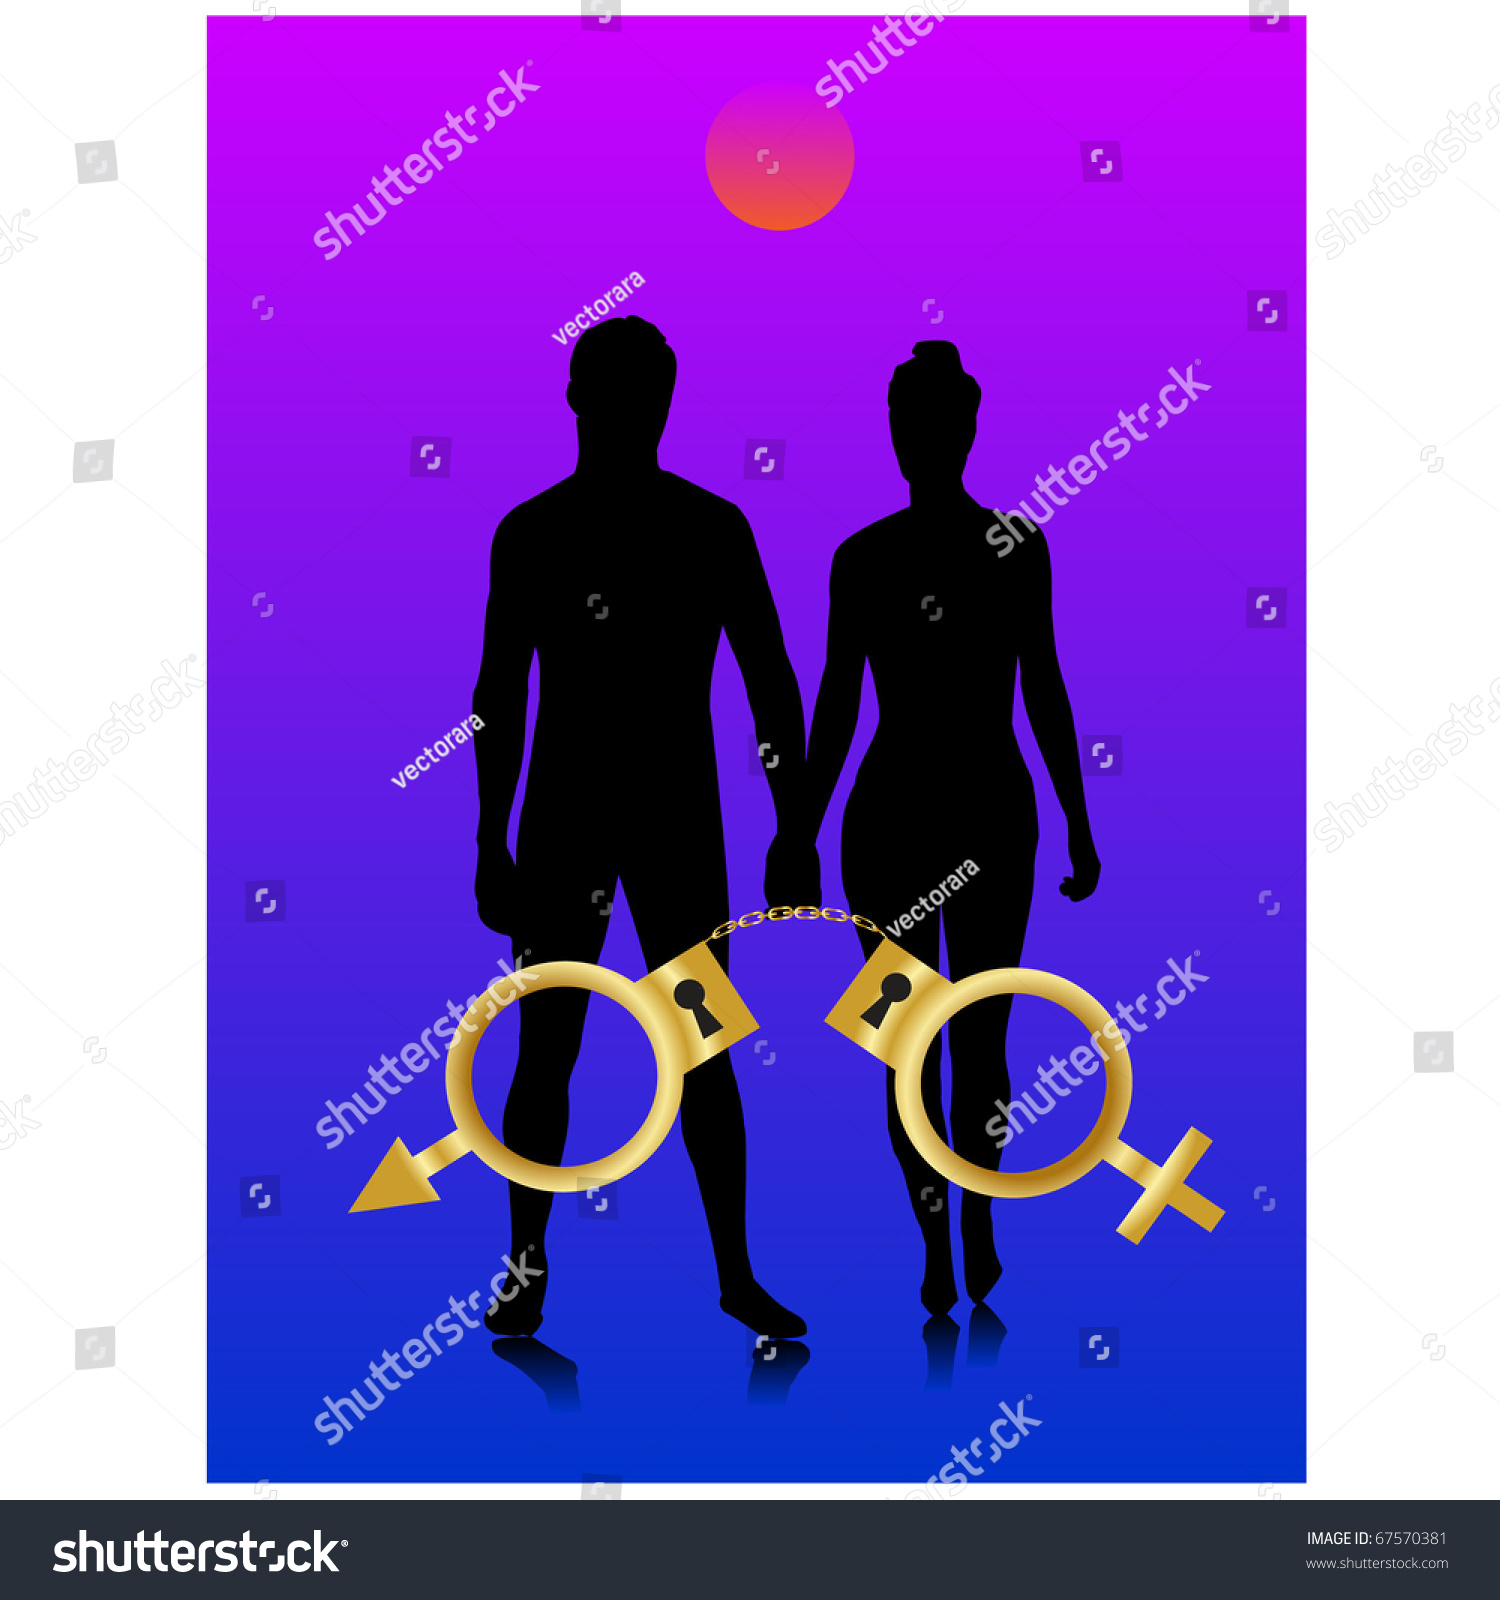 Silhouette Man Woman Sex Symbols By Stock Vector Royalty Free 67570381 Shutterstock